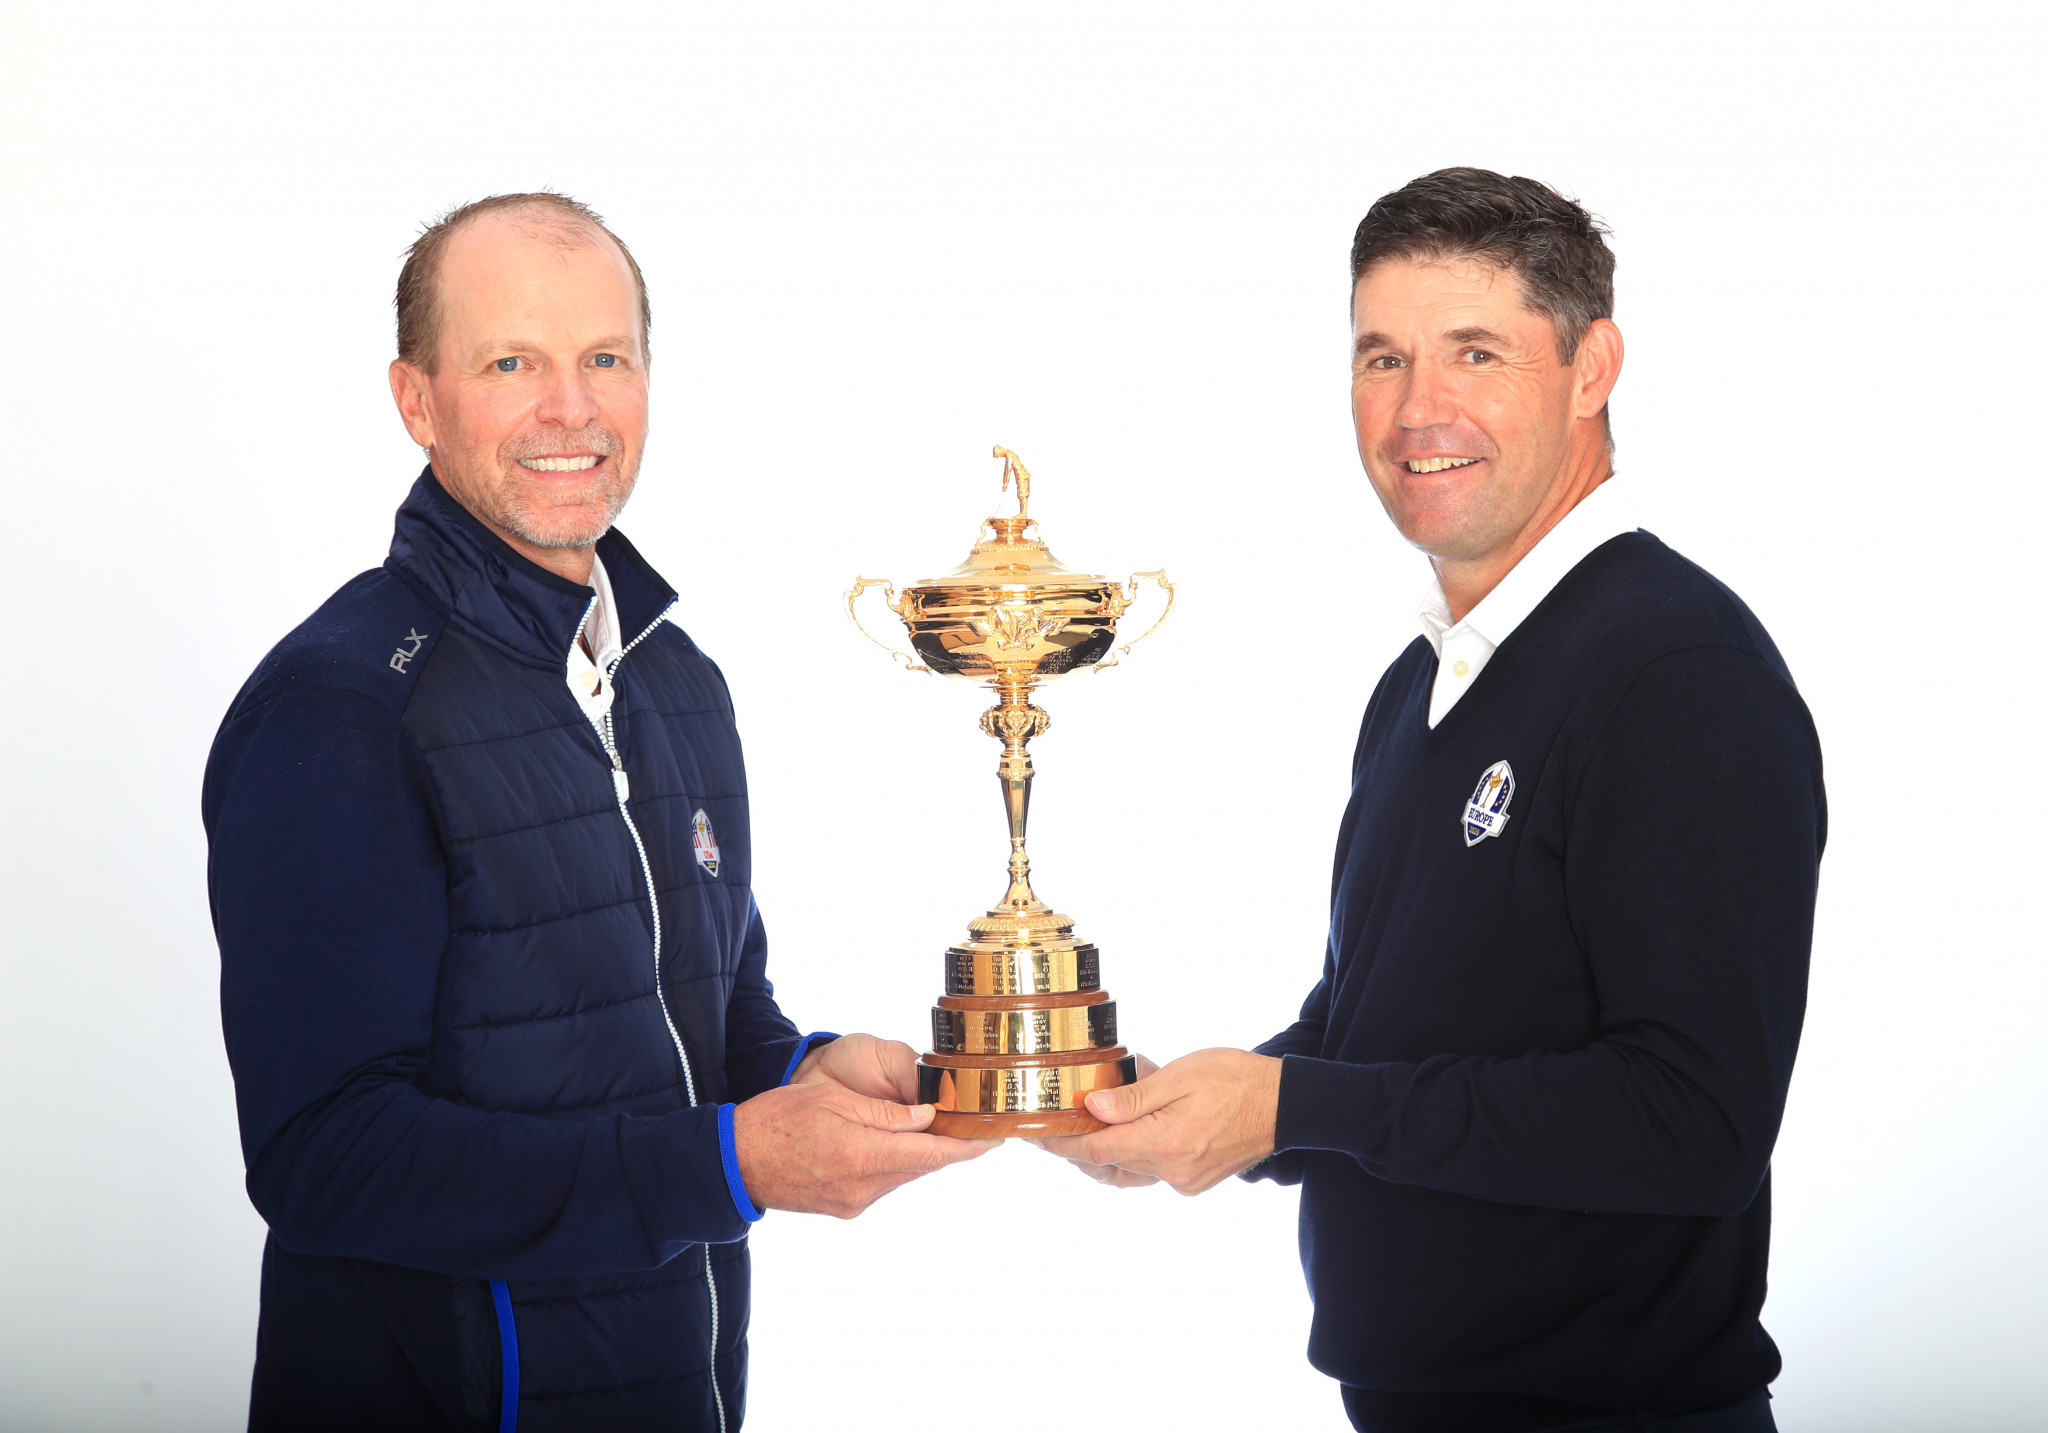 Ryder Cup captains write joint open letter in support against coronavirus